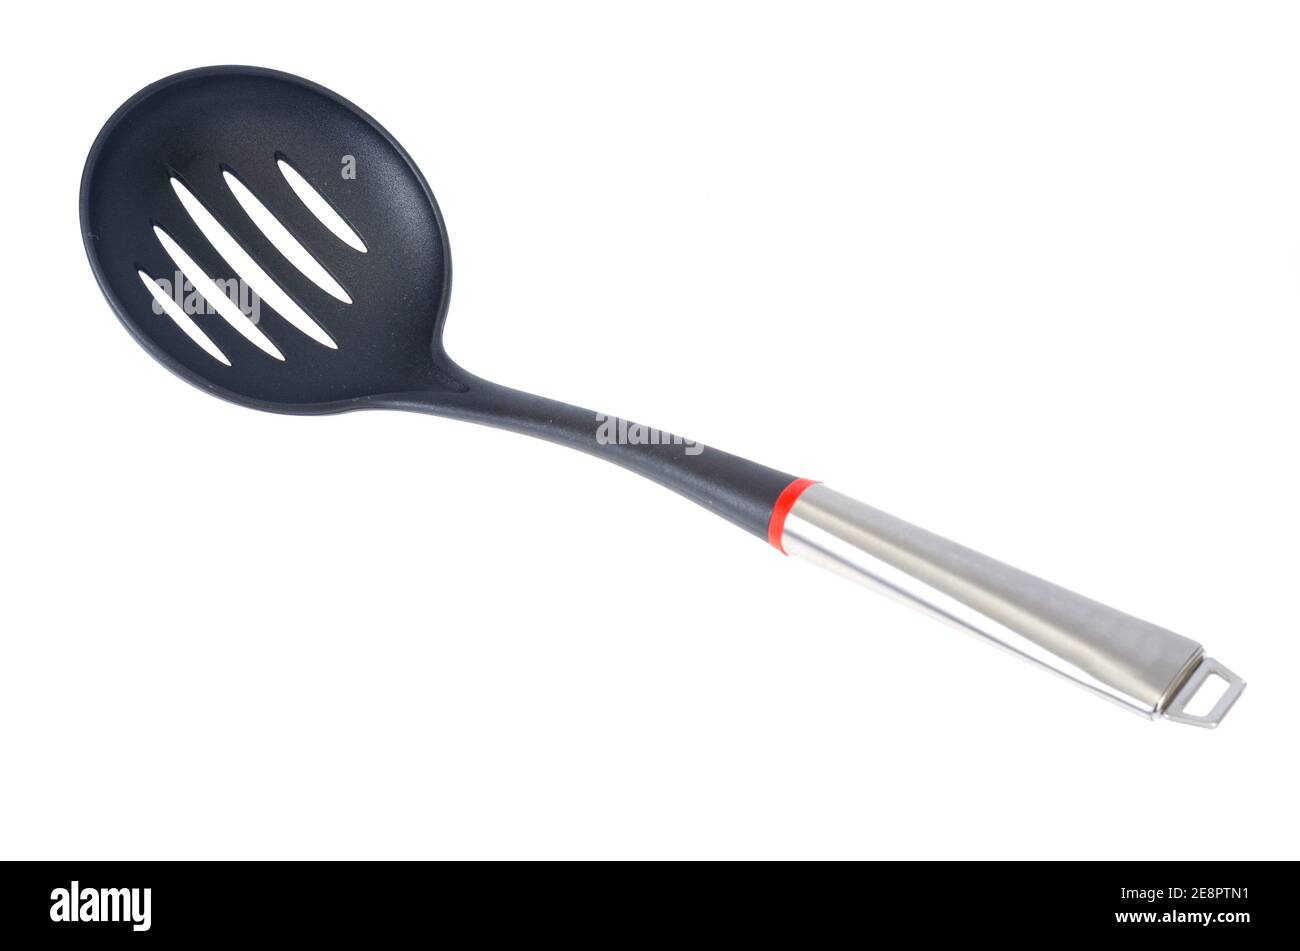 https://c8.alamy.com/comp/2E8PTN1/kitchen-utensils-spoon-with-slots-slotted-spoon-isolated-on-white-background-studio-photo-2E8PTN1.jpg